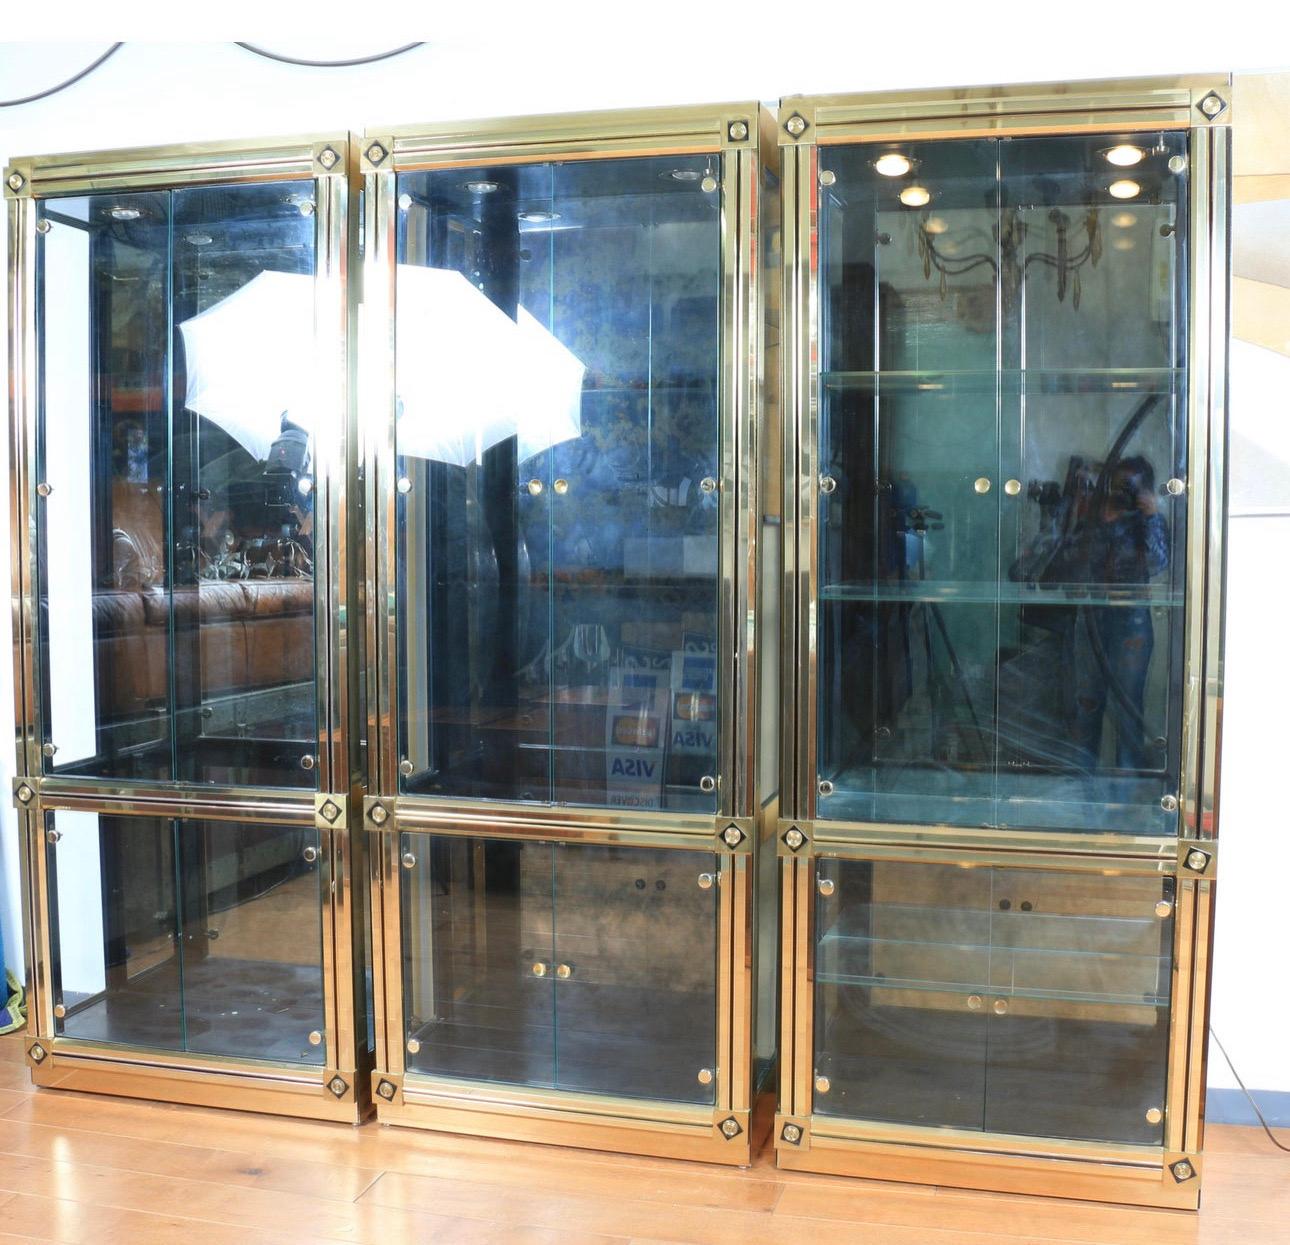 This MasterCraft Brass and Glass Cabinet is in good condition with 9 shelves on top to display items. The bottom is also have shelves and doors that open & close very great. It is also signed in the back by Master Craft. we are asking $2,500 for